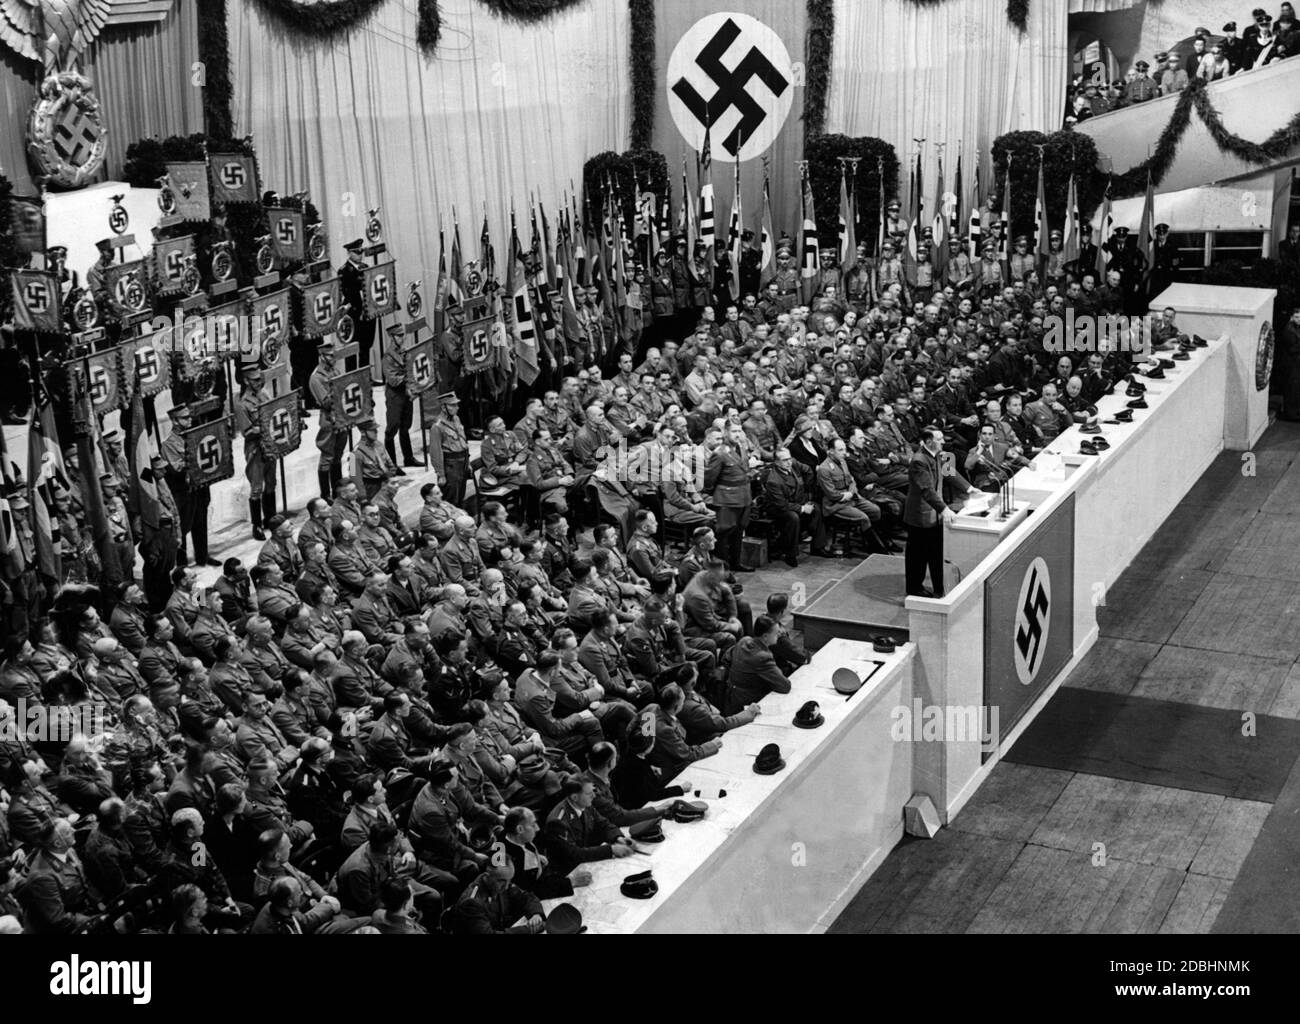 Adolf Hitler during a speech on the occasion of the upcoming fundraising for the Kriegswinterhilfswerk in the winter of 41/42. Since the beginning of the war, Hitler no longer wears a party uniform, but a field-gray jacket. On the picture are all kinds of party members of the NSDAP. To Hitler's right, Julius Schaub, Joseph Goebbels, Robert Ley, Fritz Todt, Martin Bormann, Reinhard Heydrich and Albert Speer are clearly recognizable. On Hitler's left, with their backs to the photographer, are probably Rudolf Hess, Heinrich Himmler, and Joachim von Ribbentropp. The lady with the wreath of hair Stock Photo